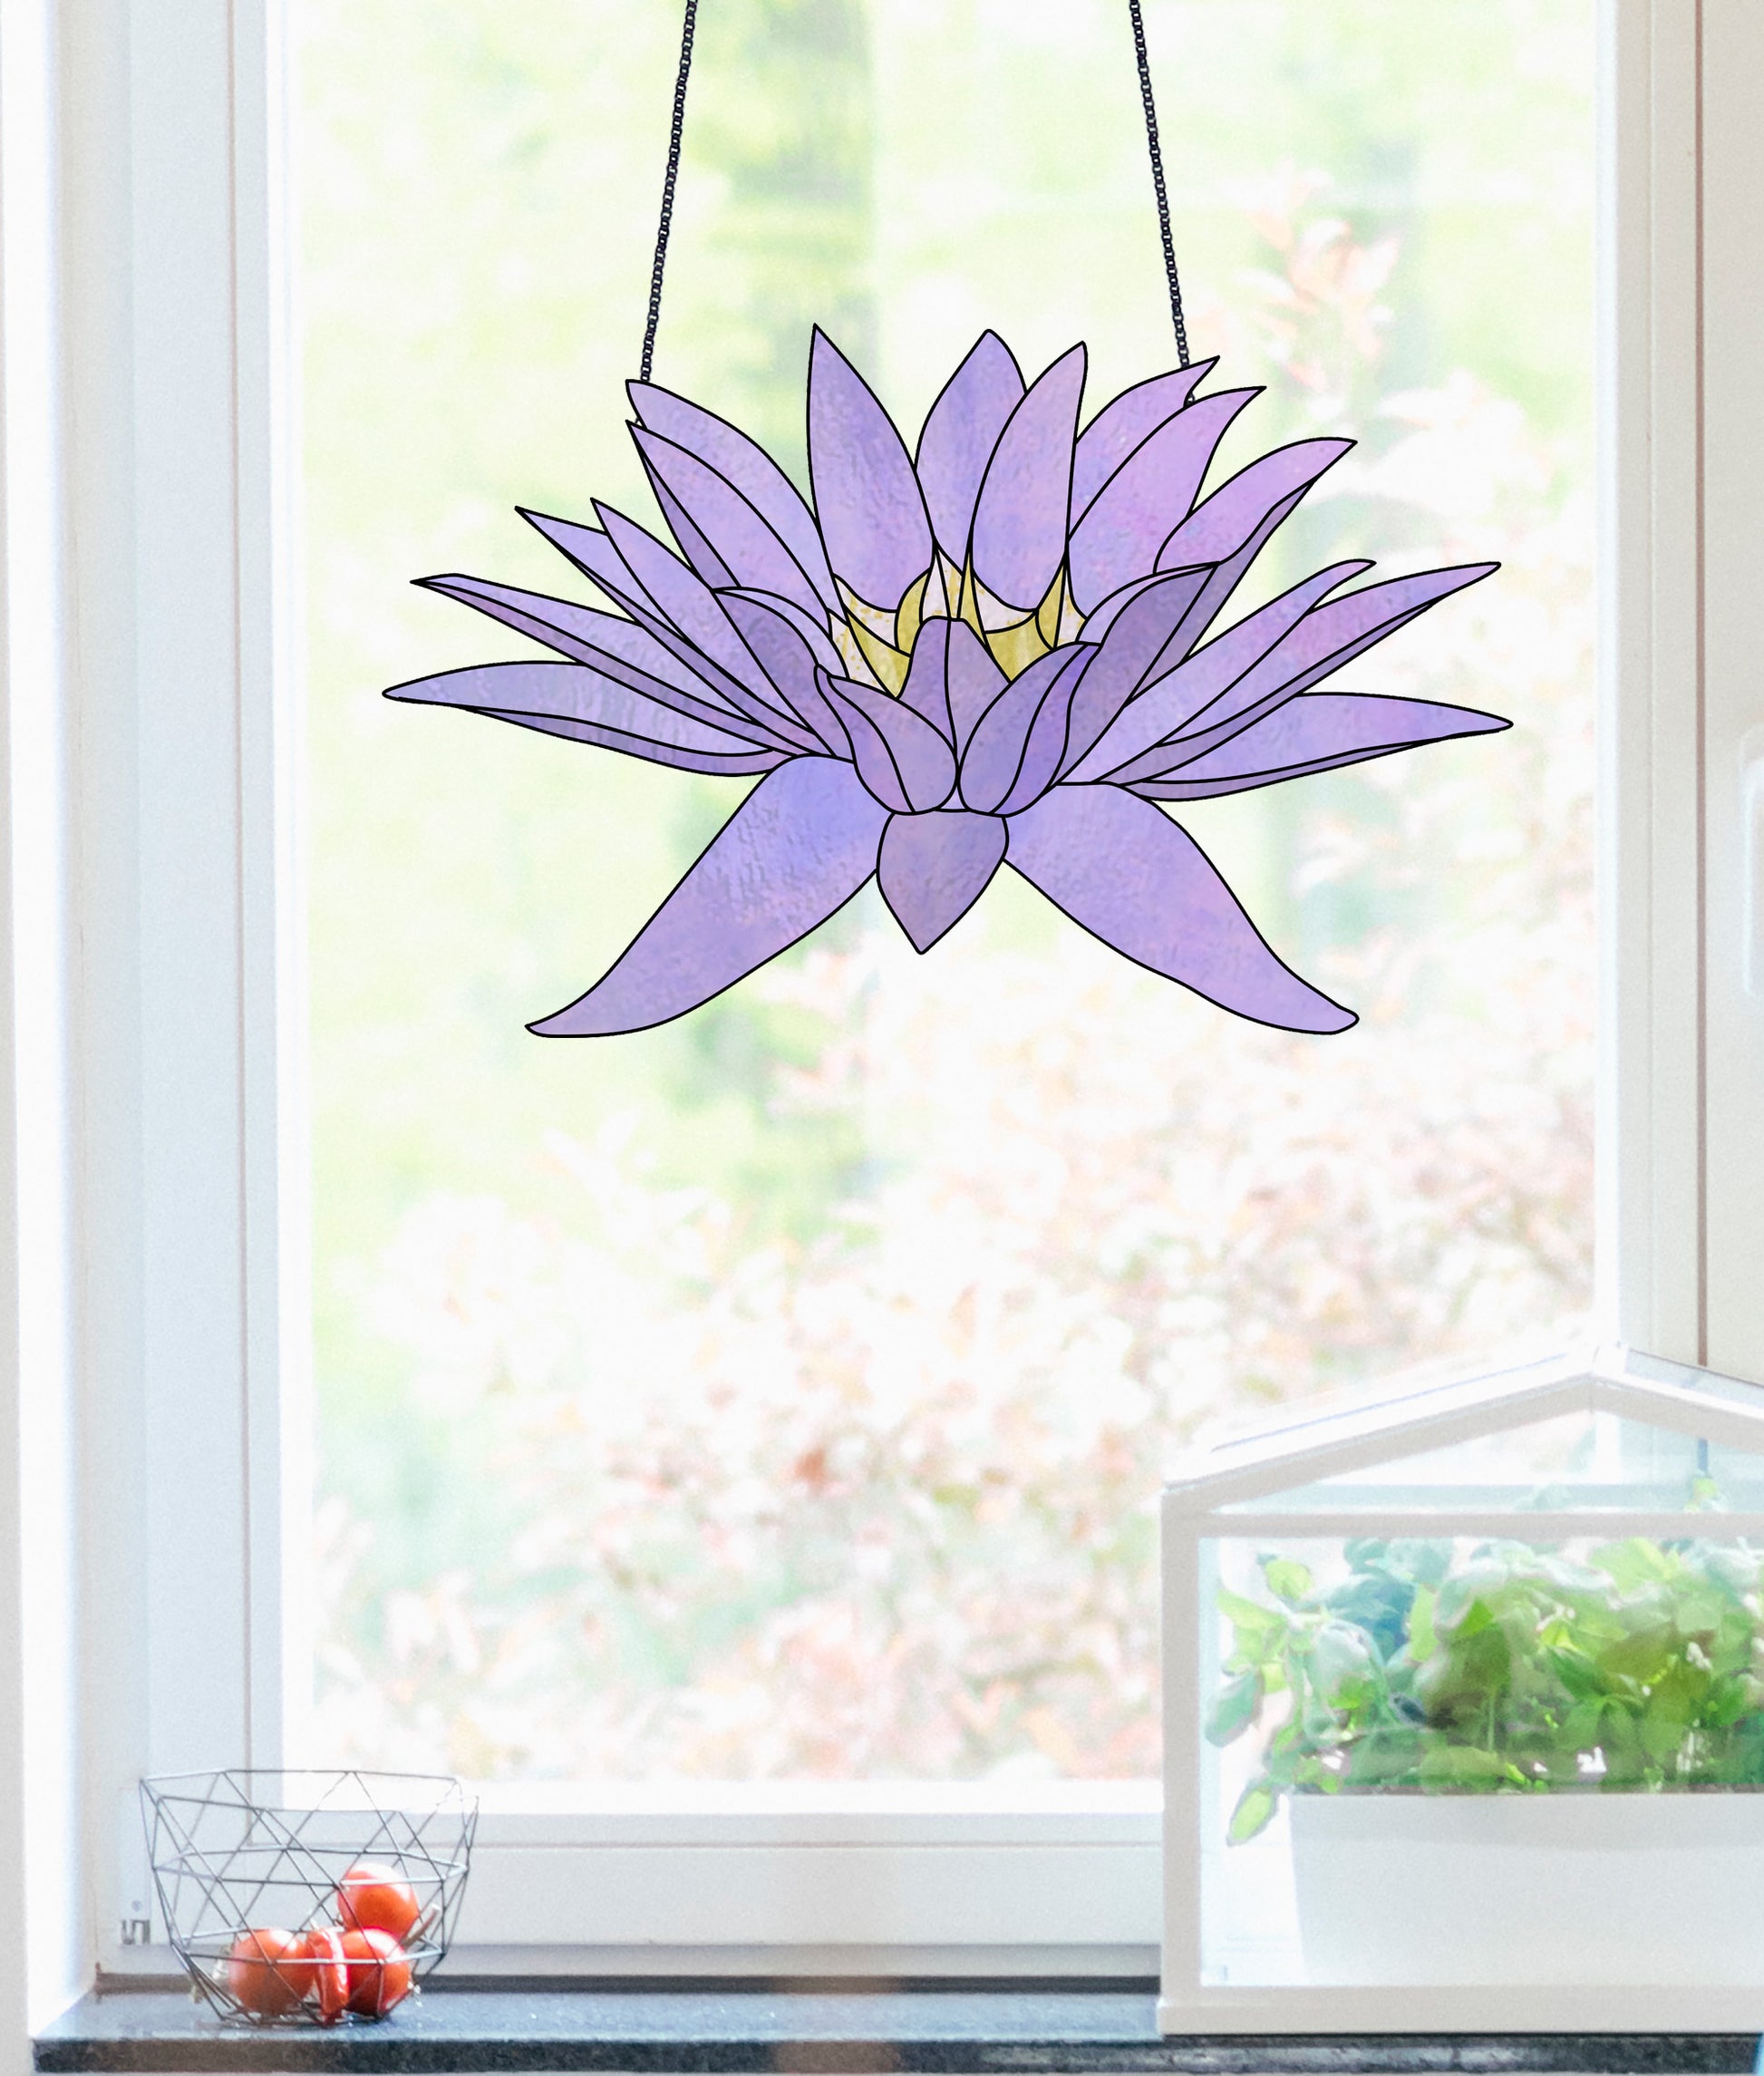 Stained glass pattern for a giant purple water lily flower, instant PDF download, shown hanging in a kitchen window